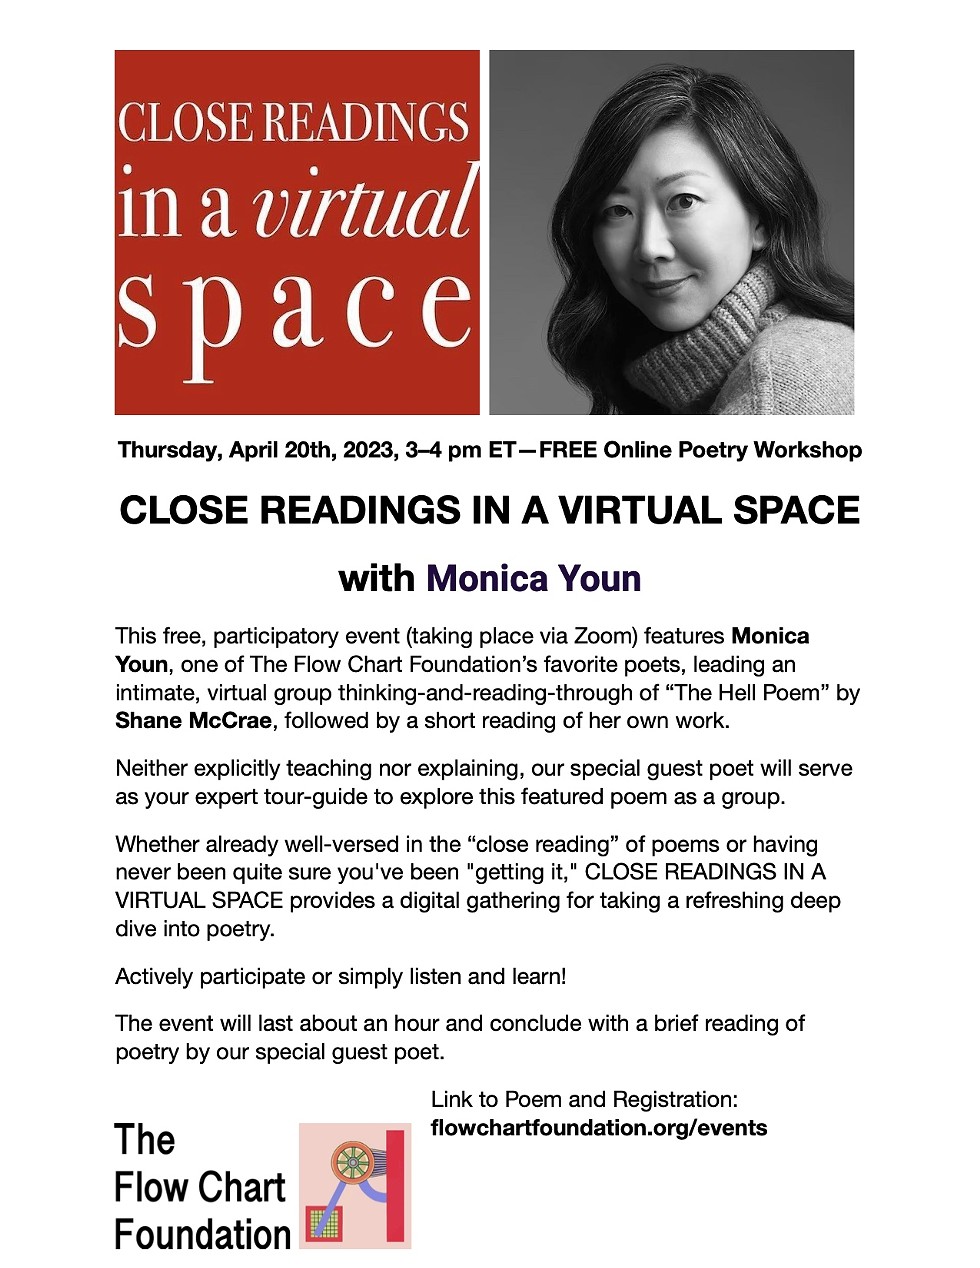 CLOSE READINGS IN A VIRTUAL SPACE with Monica Youn - Free online poetry workshop Ap 20th, 3-4pm ET